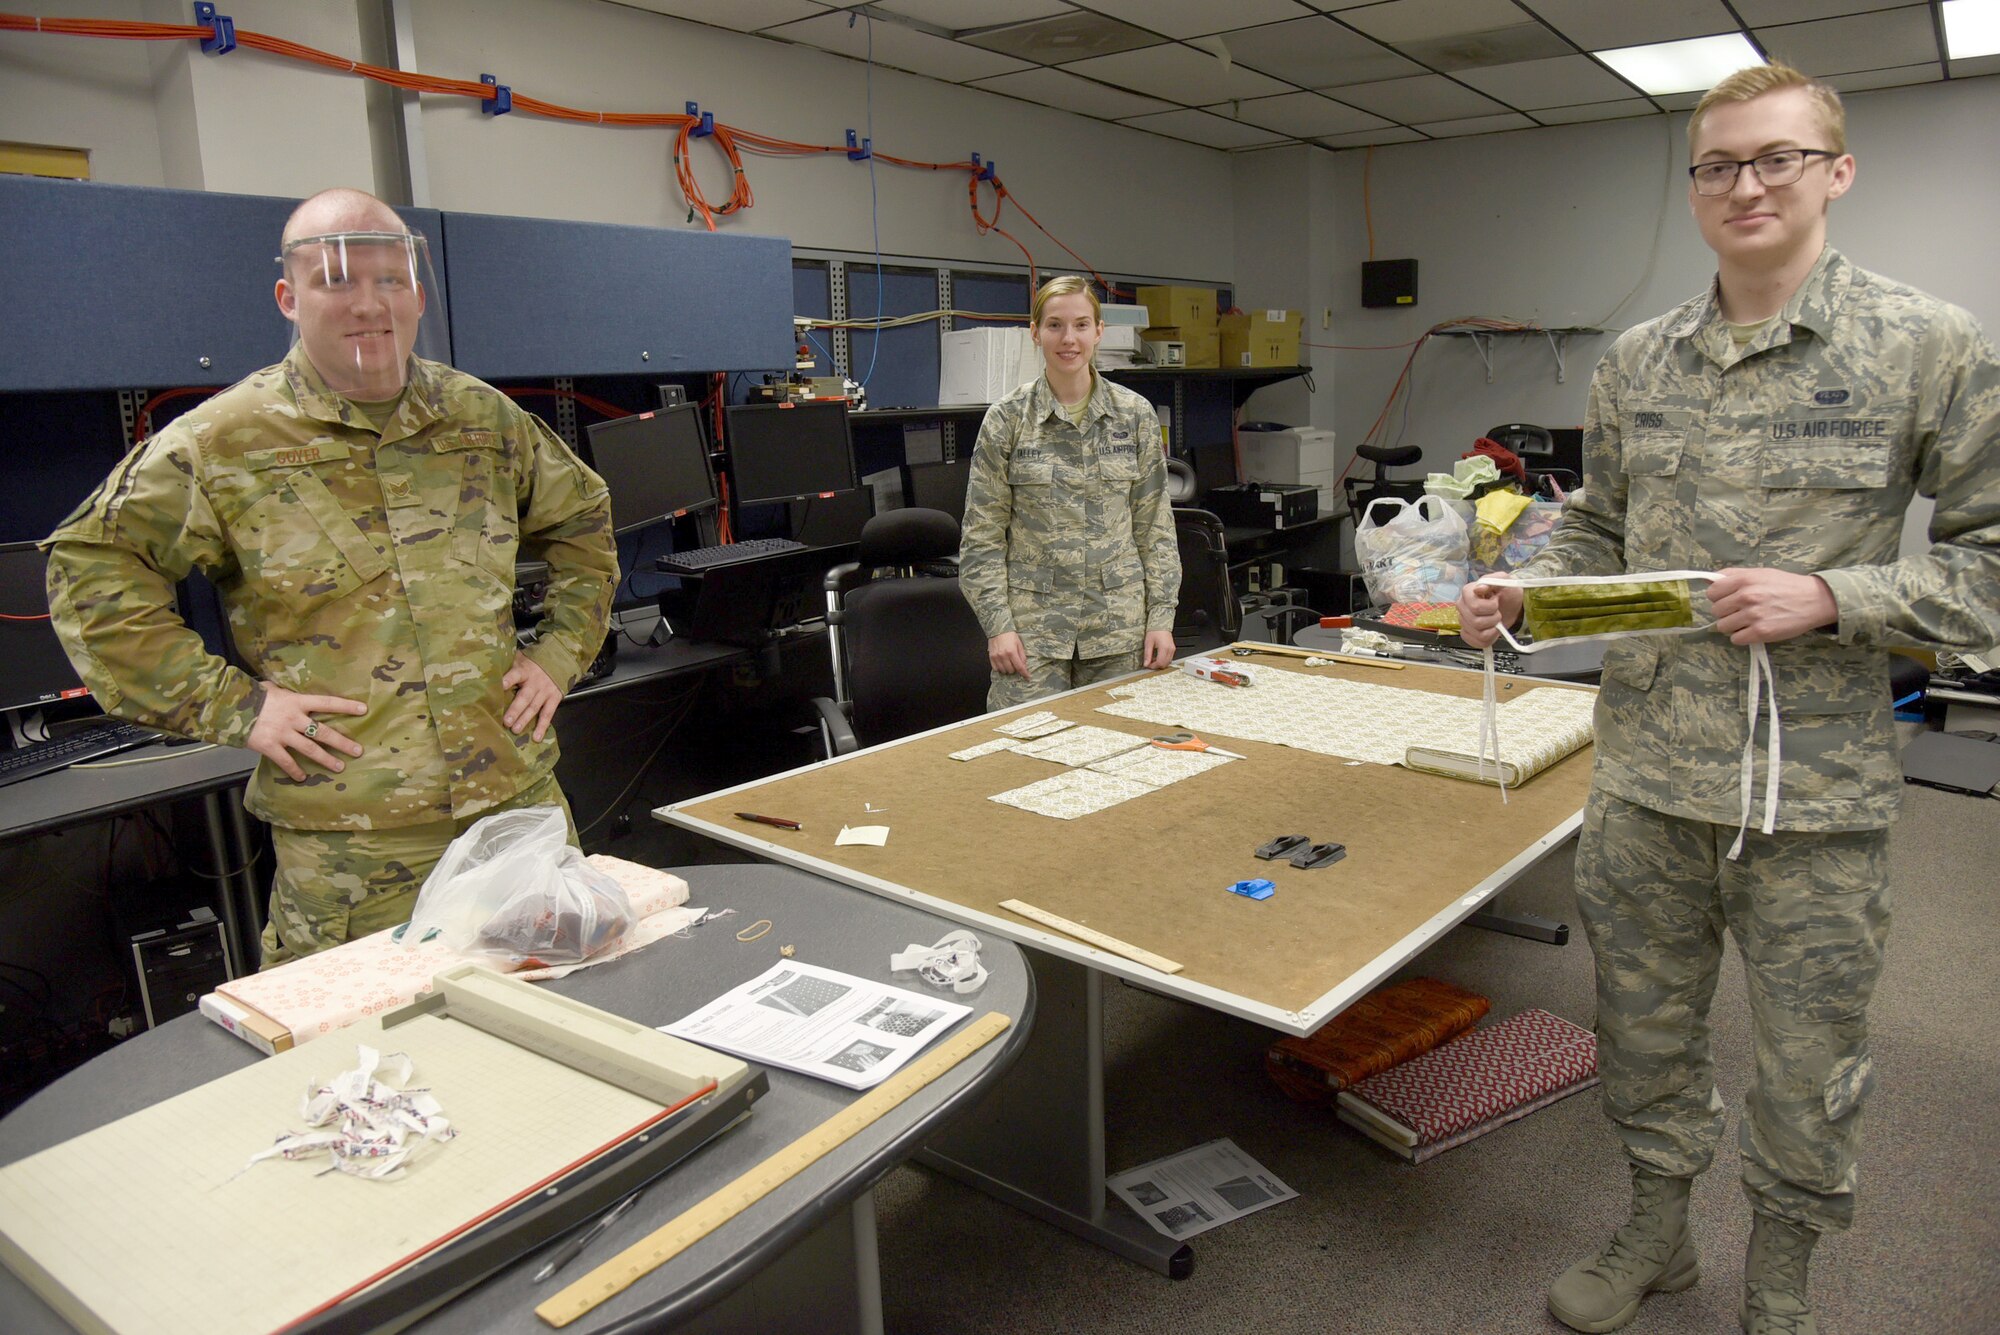 Staff Sgt. Zachary Goyer, Airman First Class Sarah Talley and Airman First Class Stephen Criss, with the 552nd Air Control Network Squadron, are volunteering their time and resources to make fabric masks and 3-D printed clips for plastic face shields. They're working with at least 16 military and spouse volunteers. A local company, donated fabric and materials to their cause. The Airmen have already donated over 48 of the 3-D printed clips and shields and several fabric masks to local hospice organizations, and have more ready to go. (U.S. Air Force photo/Kelly White)